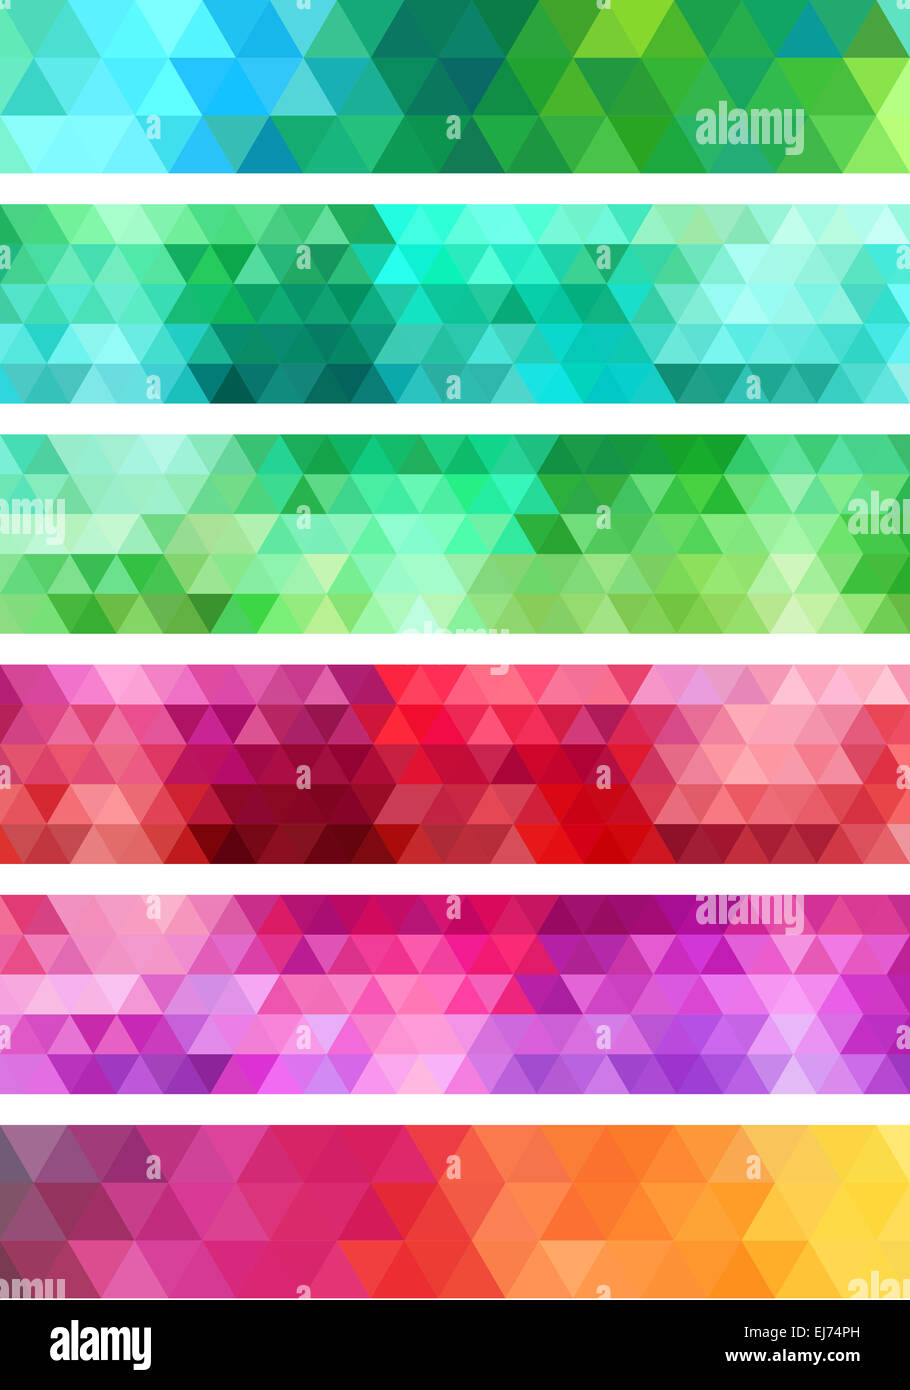 abstract colorful geometric banner, set of design elements Stock Photo